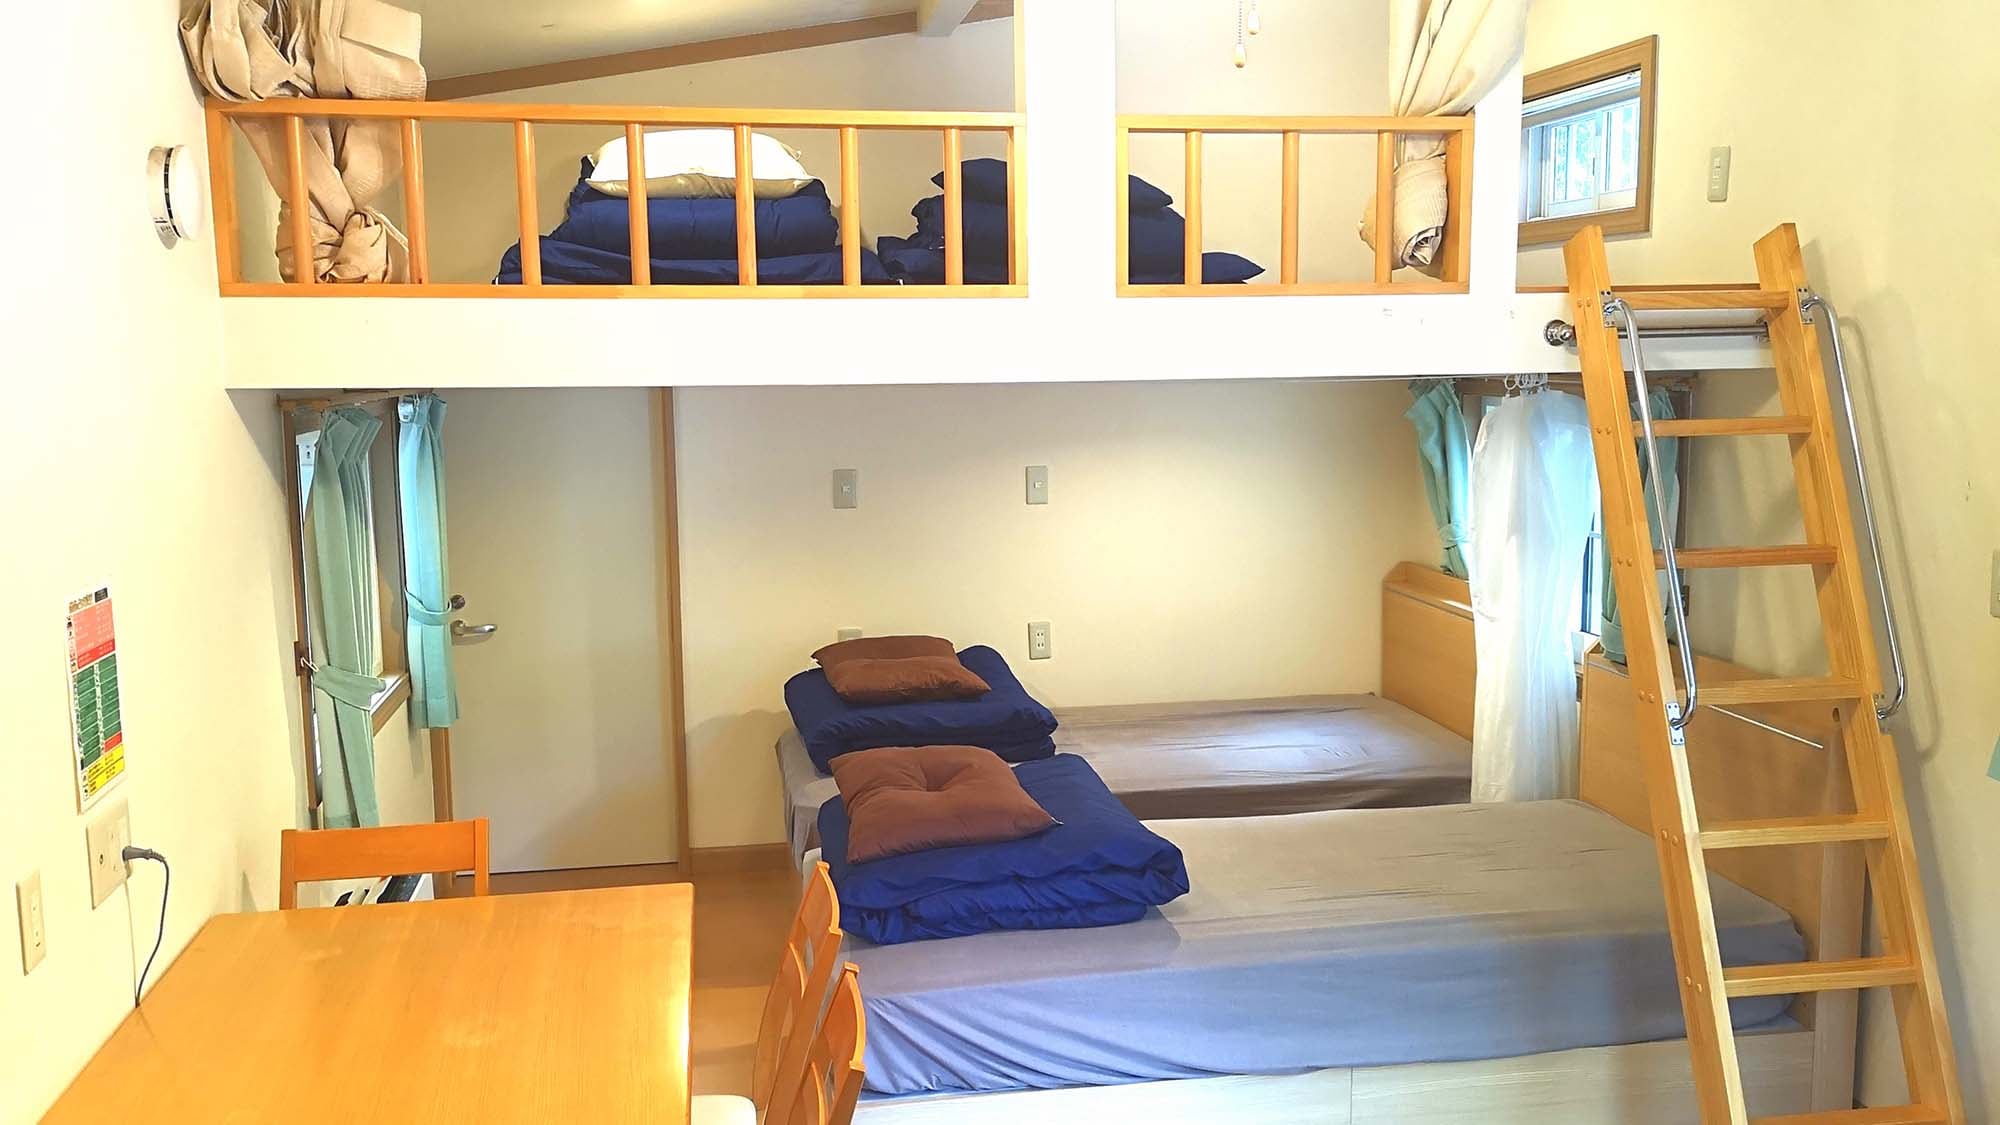 ・ There are two rooms in one trailer house "B-B Palace", which is ideal for two groups.